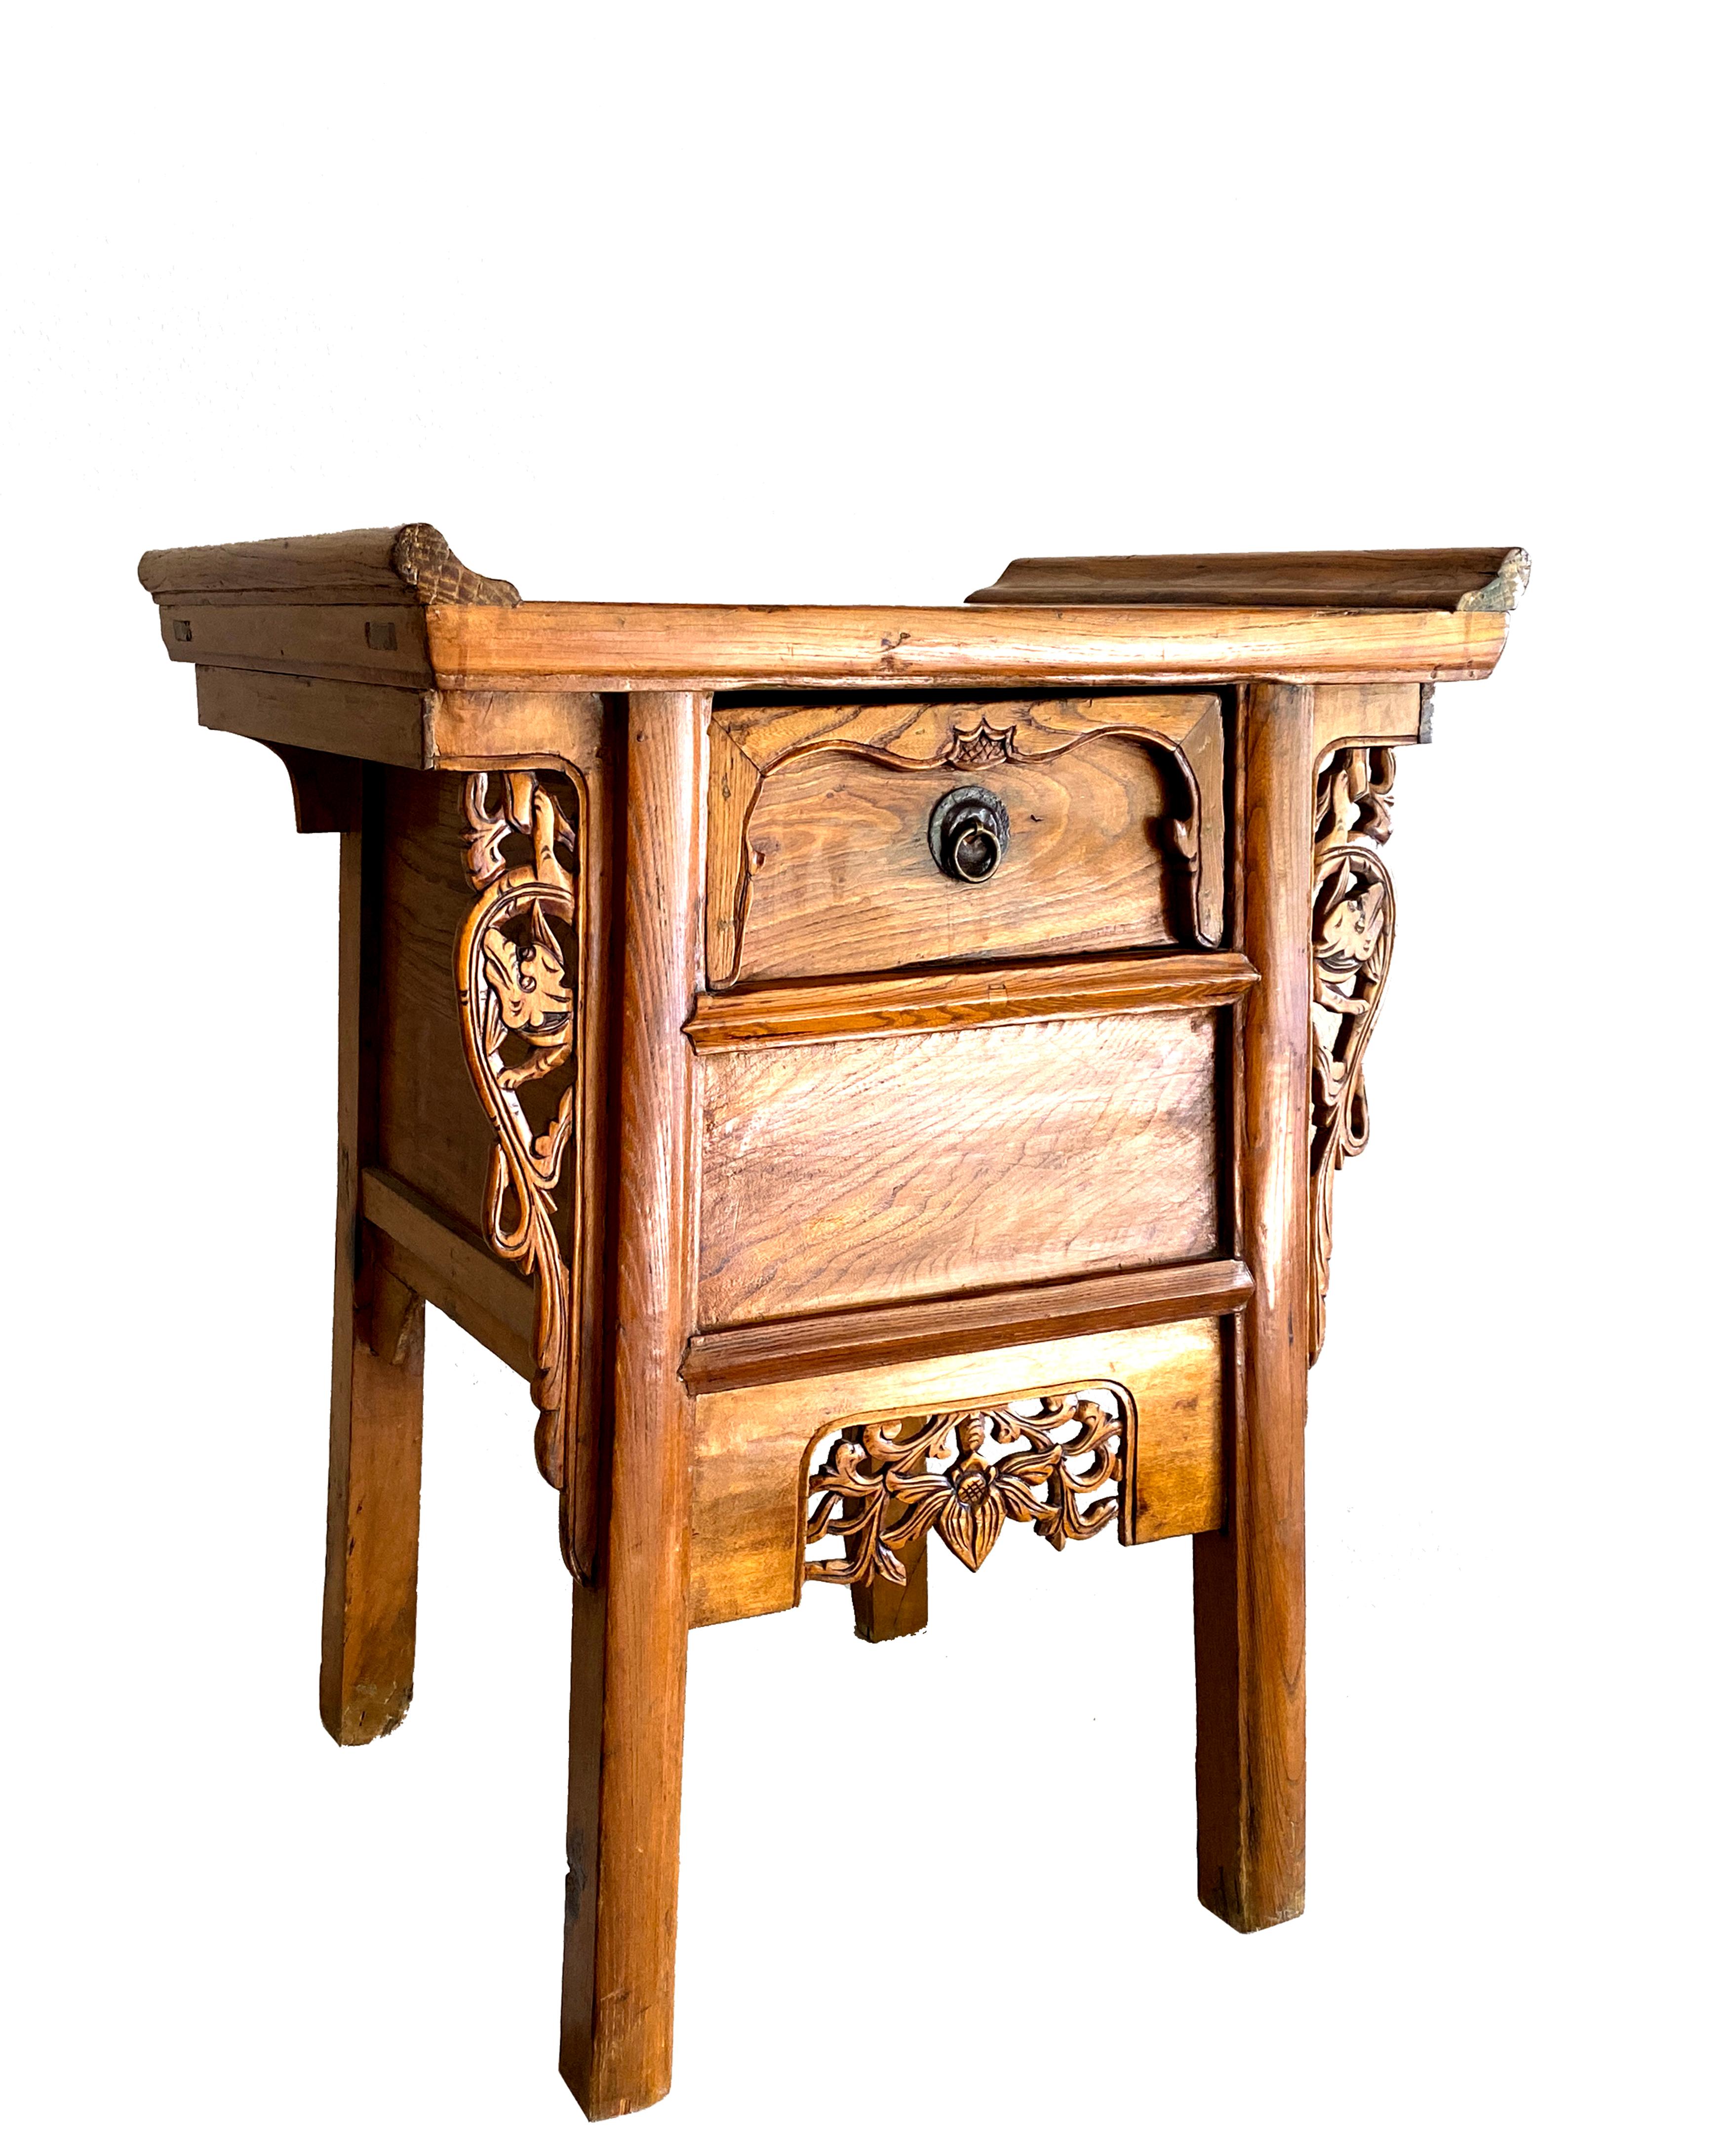 Antique Chinese beech hardwood single drawer carved coffer table

Here we are offering an antique Chinese beech hardwood single drawer carved coffer table. It's from late 19th to early 20th century. Although it has a lot of wear and tear, it's